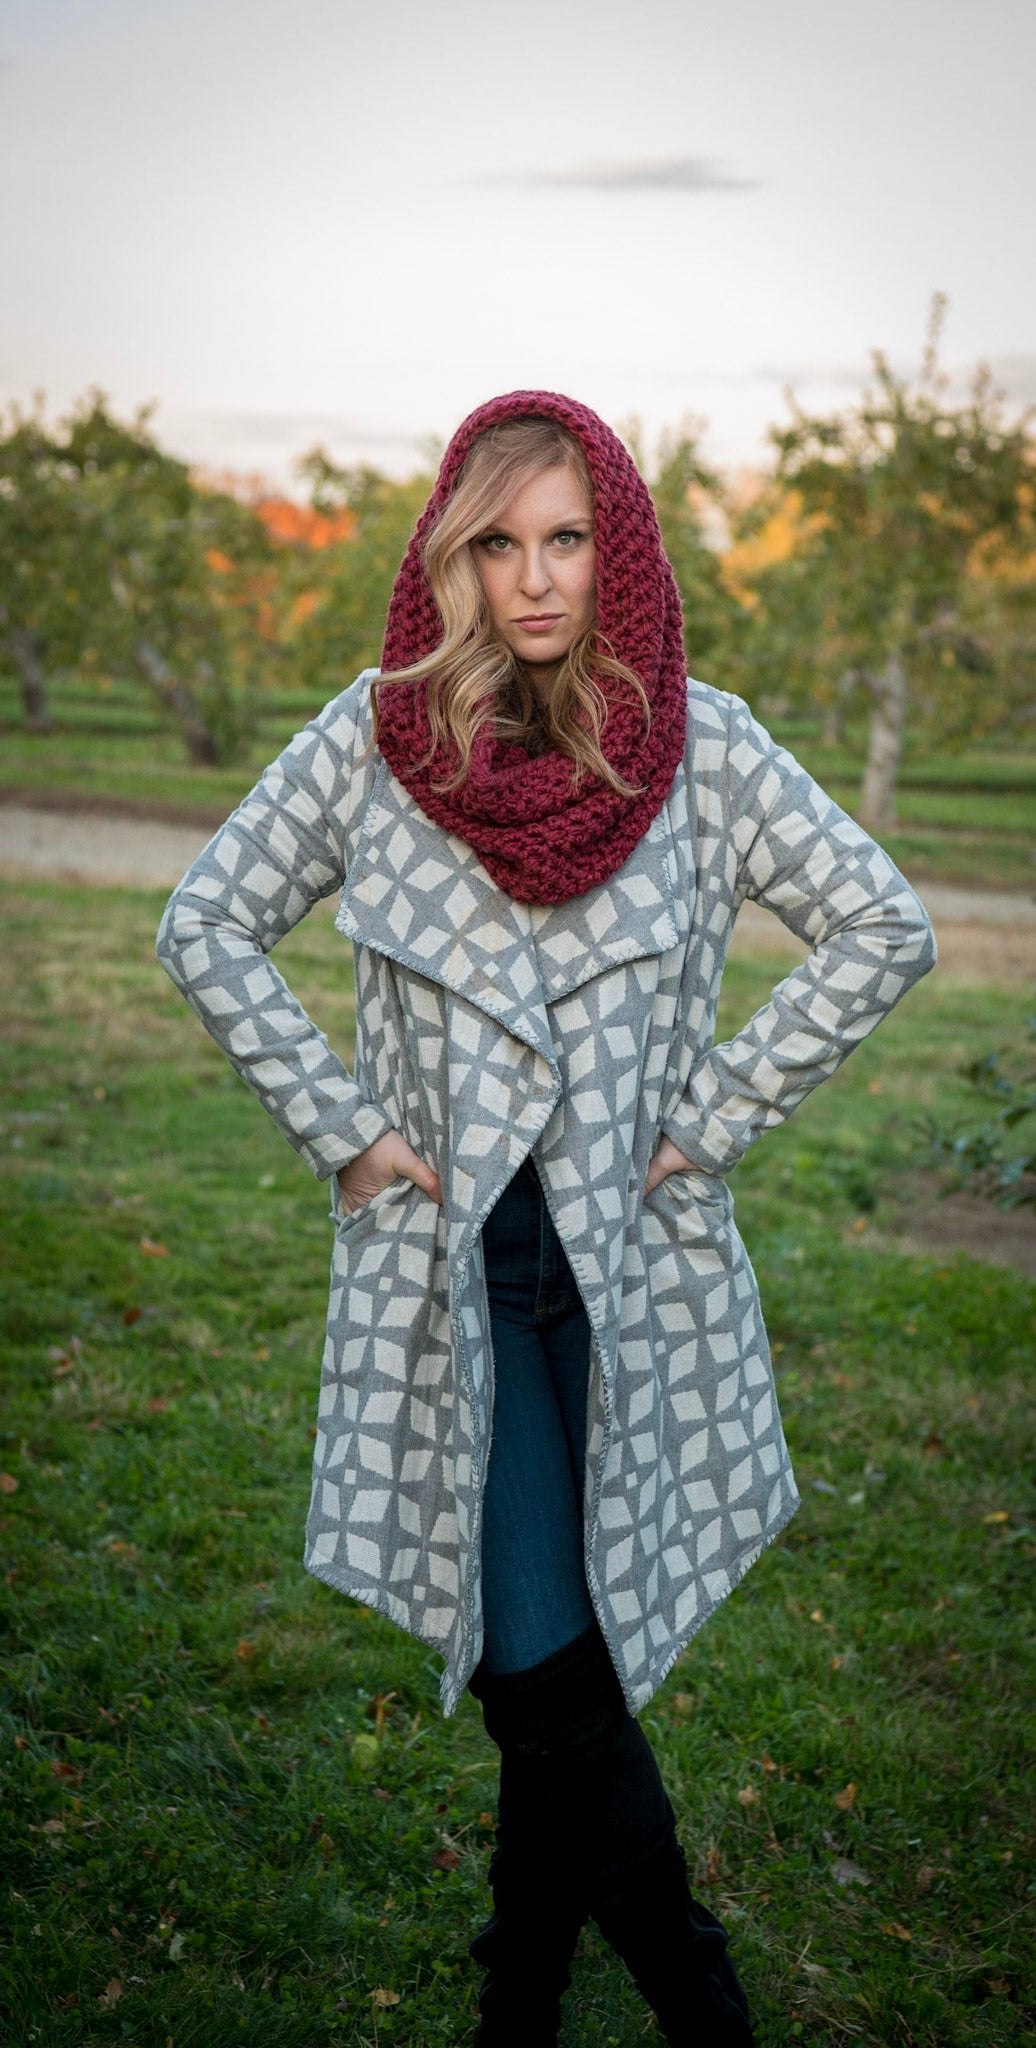 The McIntire Cowl Scarf in Wine